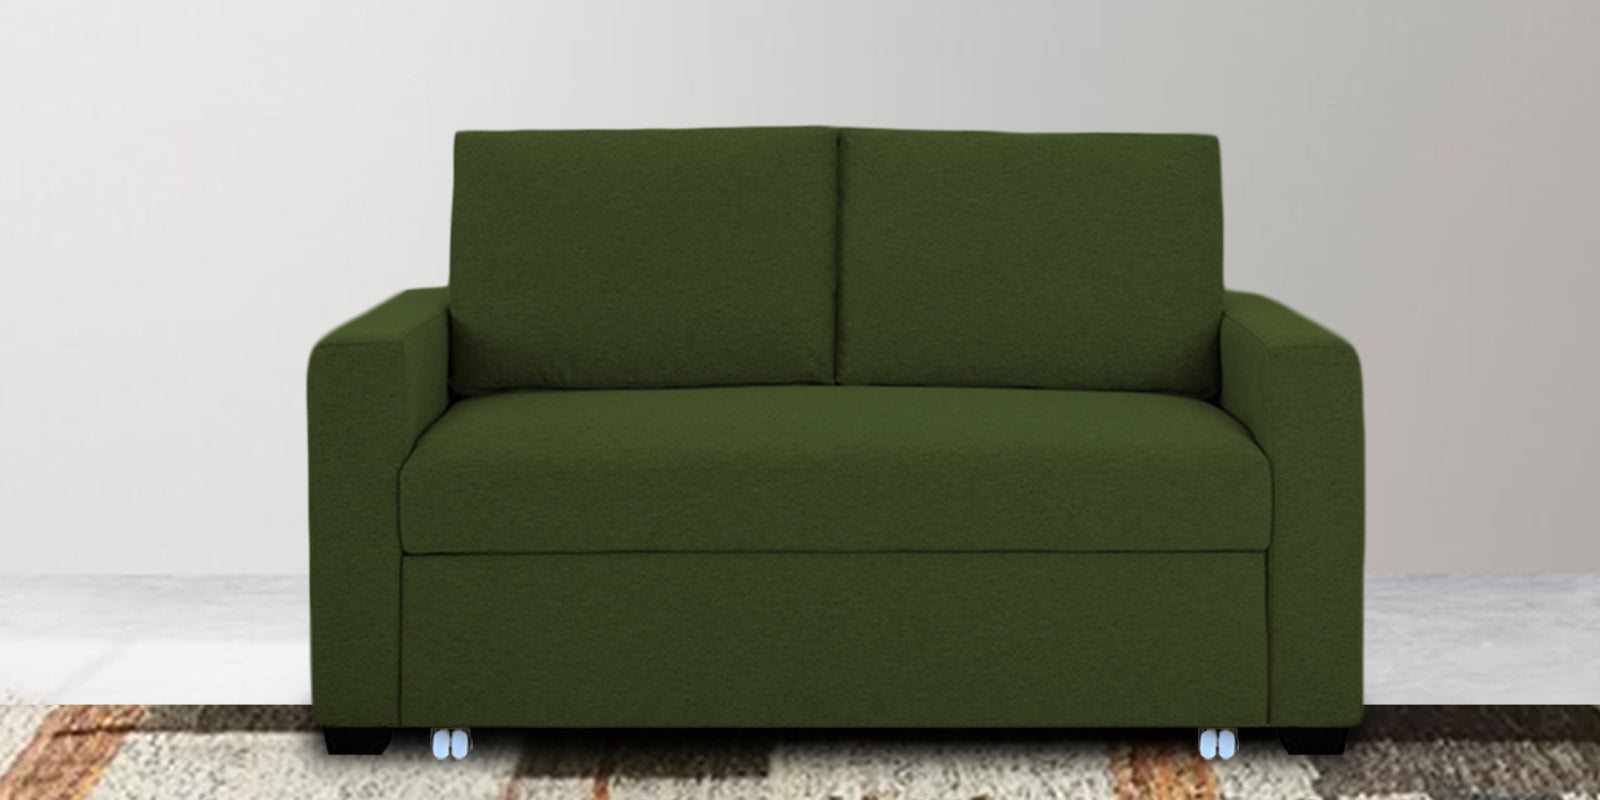 Lobby Fabric 2 Seater Pull Out Sofa Cum Bed In Olive Green Colour